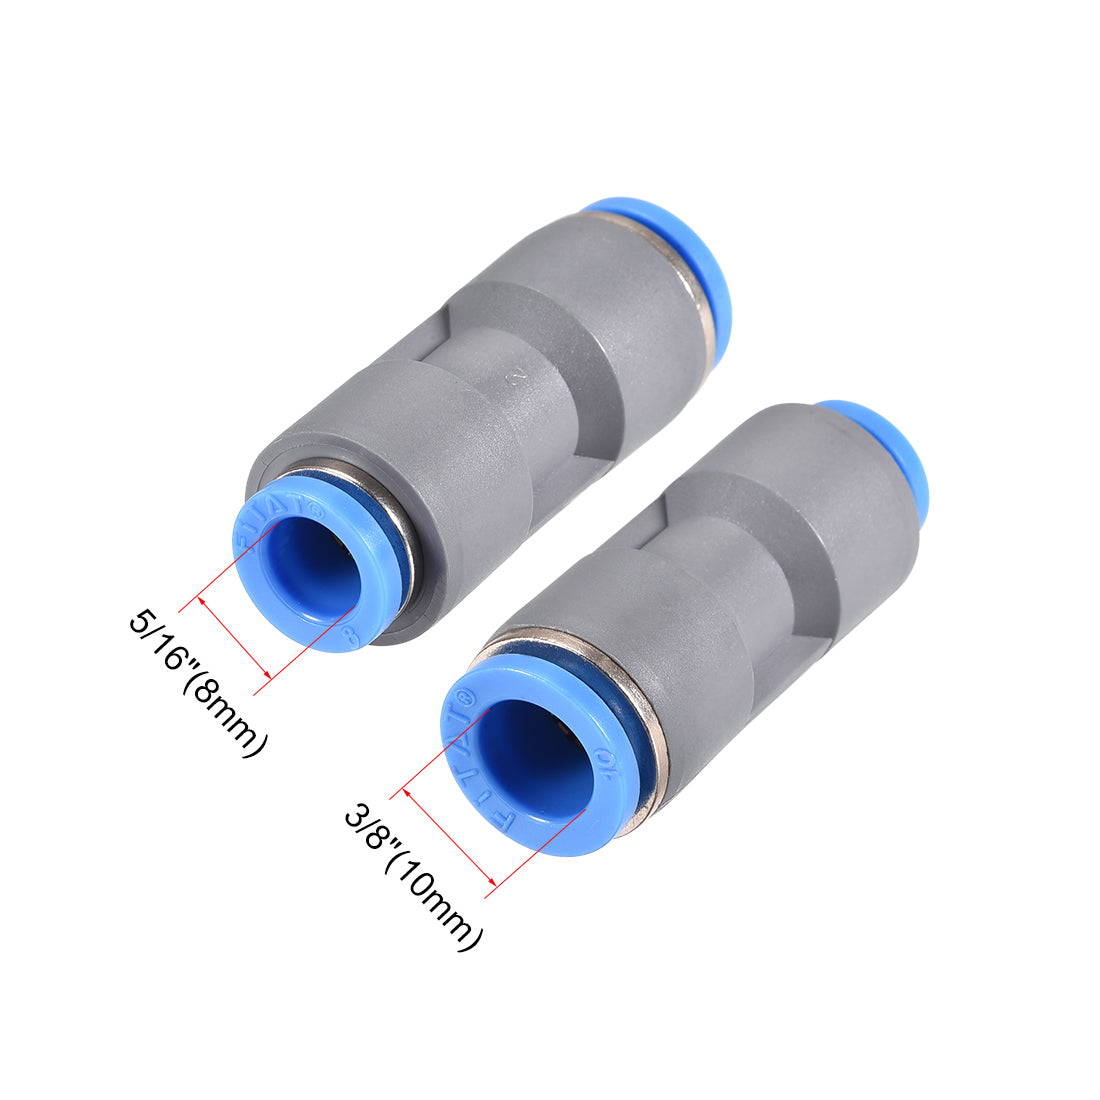 uxcell Uxcell Straight Push to Connector Reducer Fitting 10mm to 8mm Plastic Union Pipe Tube Fitting Grey 10Pcs